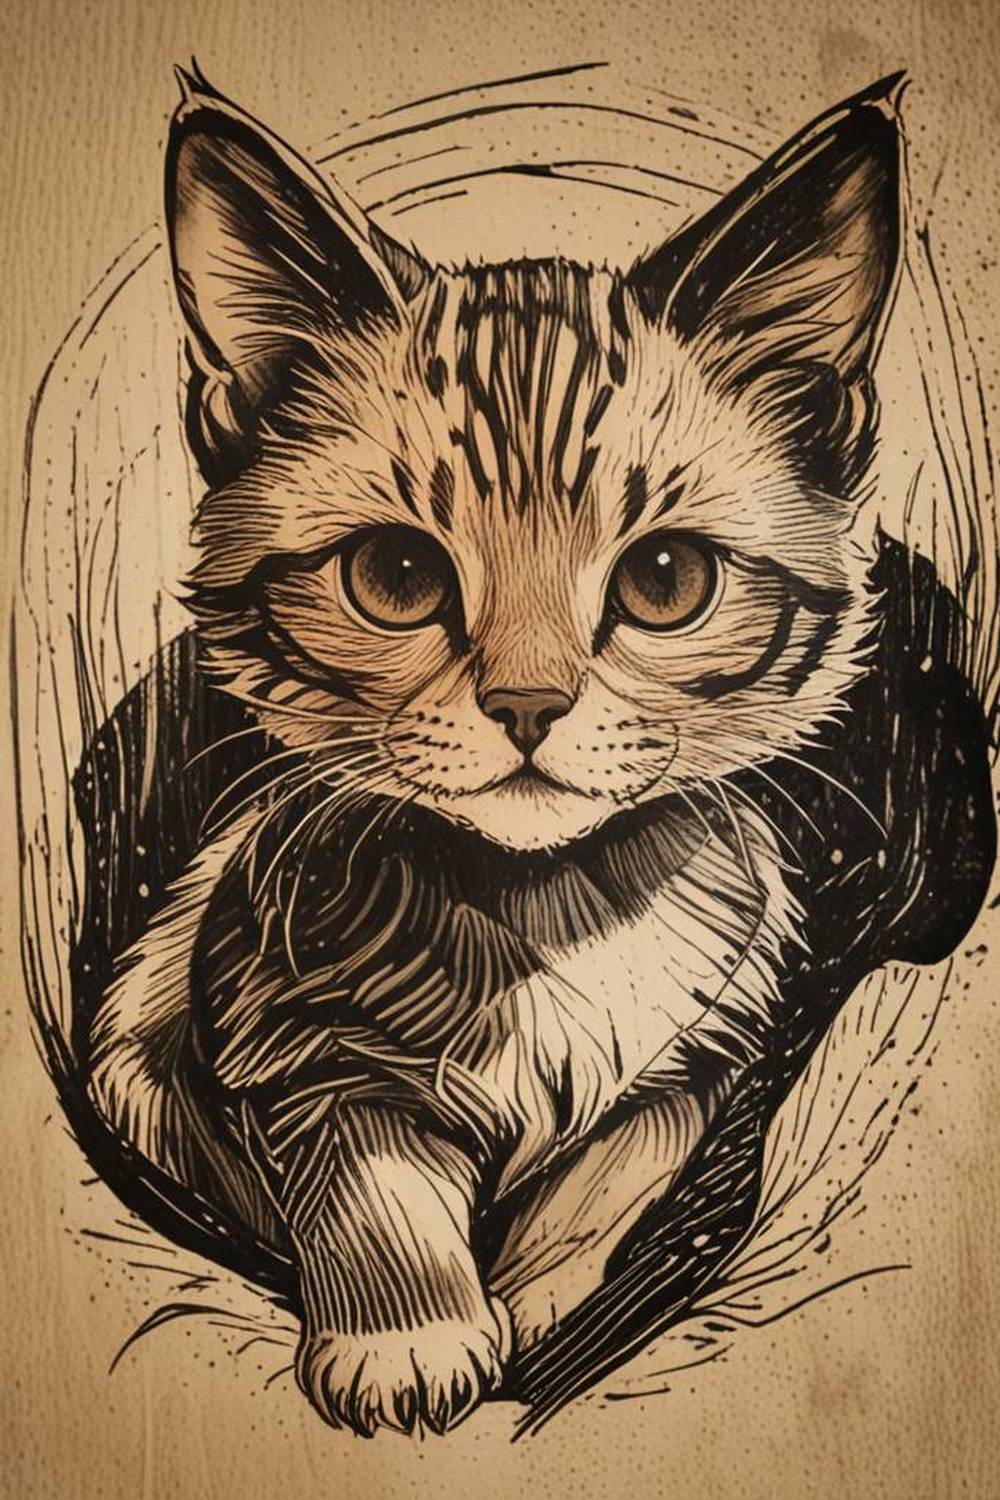 Tattoo Set #8 SCETCHES – Cats 42 sketches pinterest preview image.